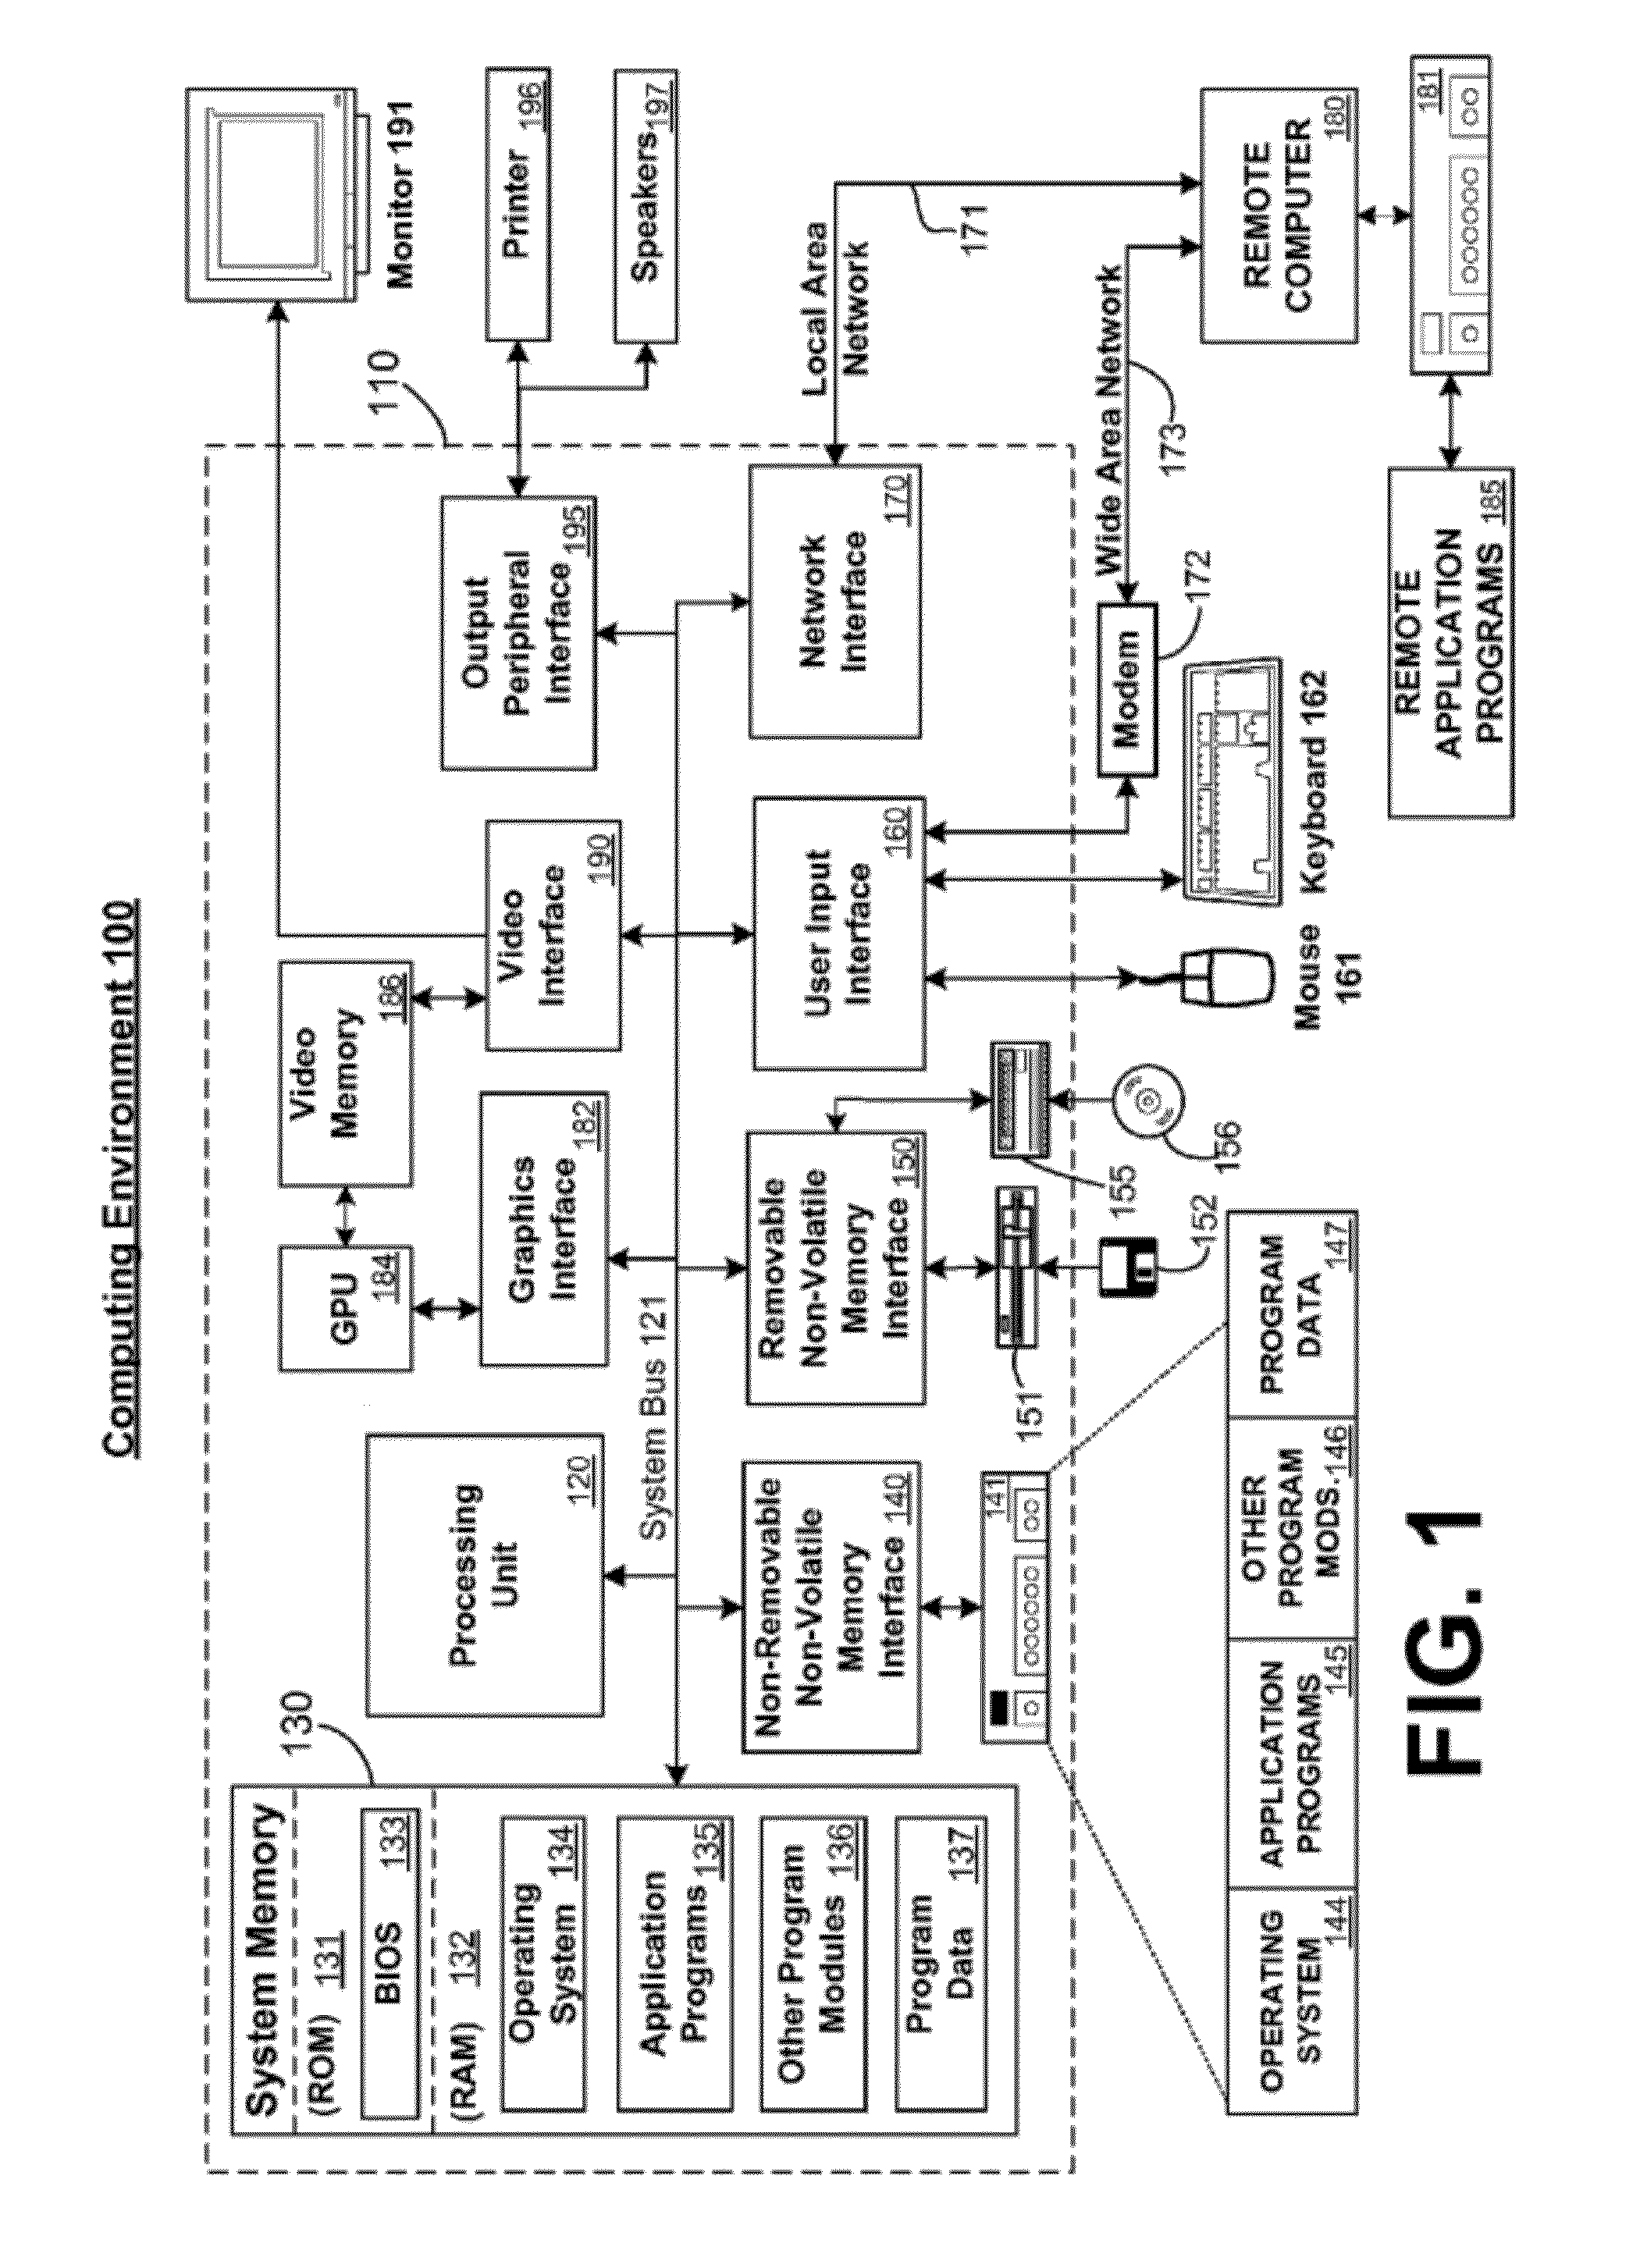 Systems and methods for identifying sets of similar products